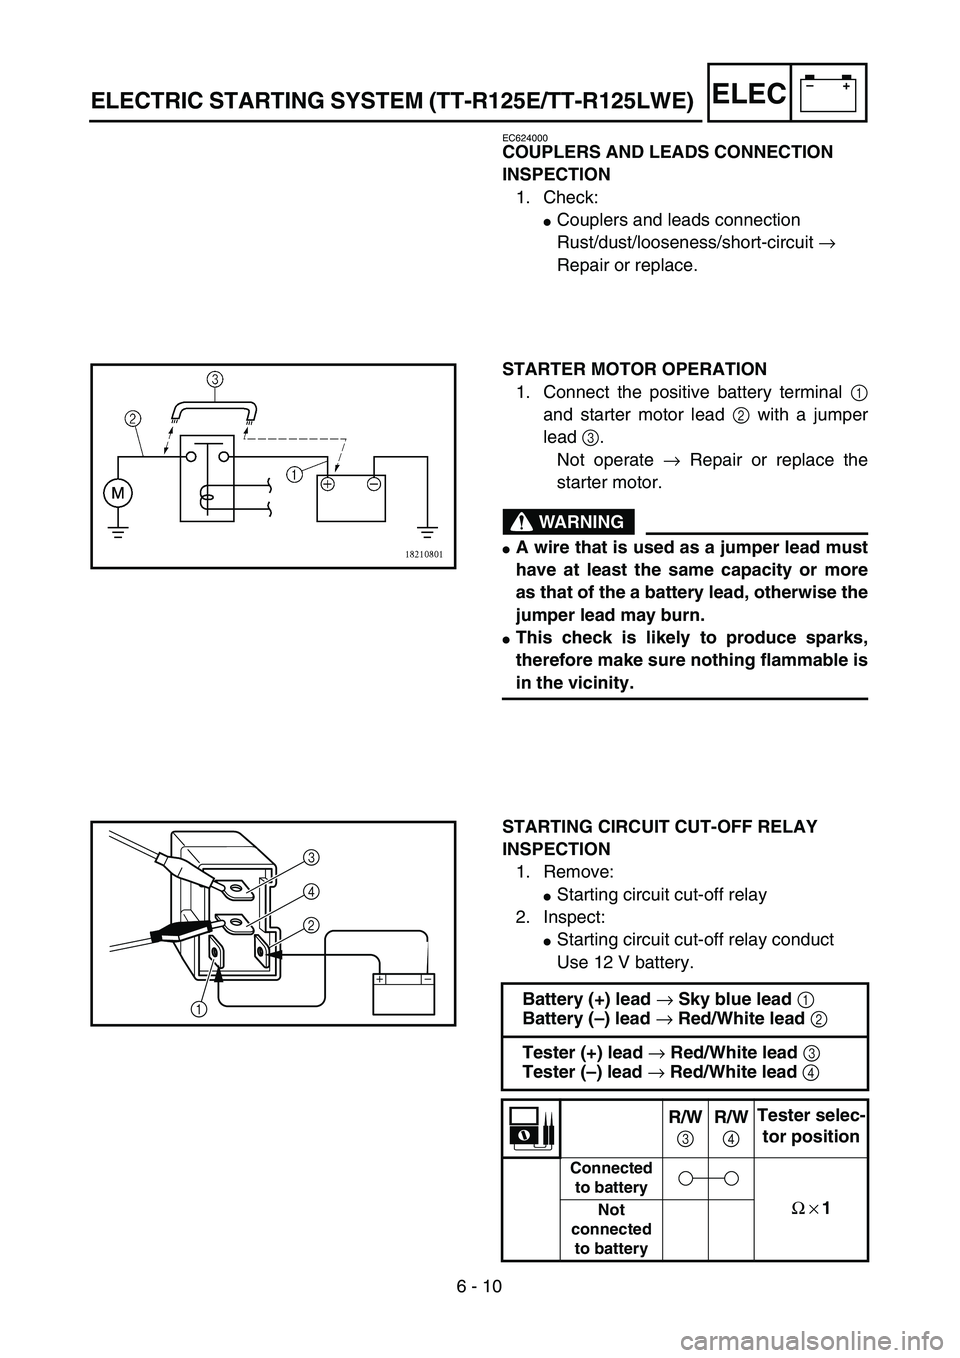 YAMAHA TTR125 2007  Owners Manual 6 - 10
–+ELEC
EC624000
COUPLERS AND LEADS CONNECTION 
INSPECTION
1. Check:
Couplers and leads connection 
Rust/dust/looseness/short-circuit → 
Repair or replace.
STARTER MOTOR OPERATION
1. Connec